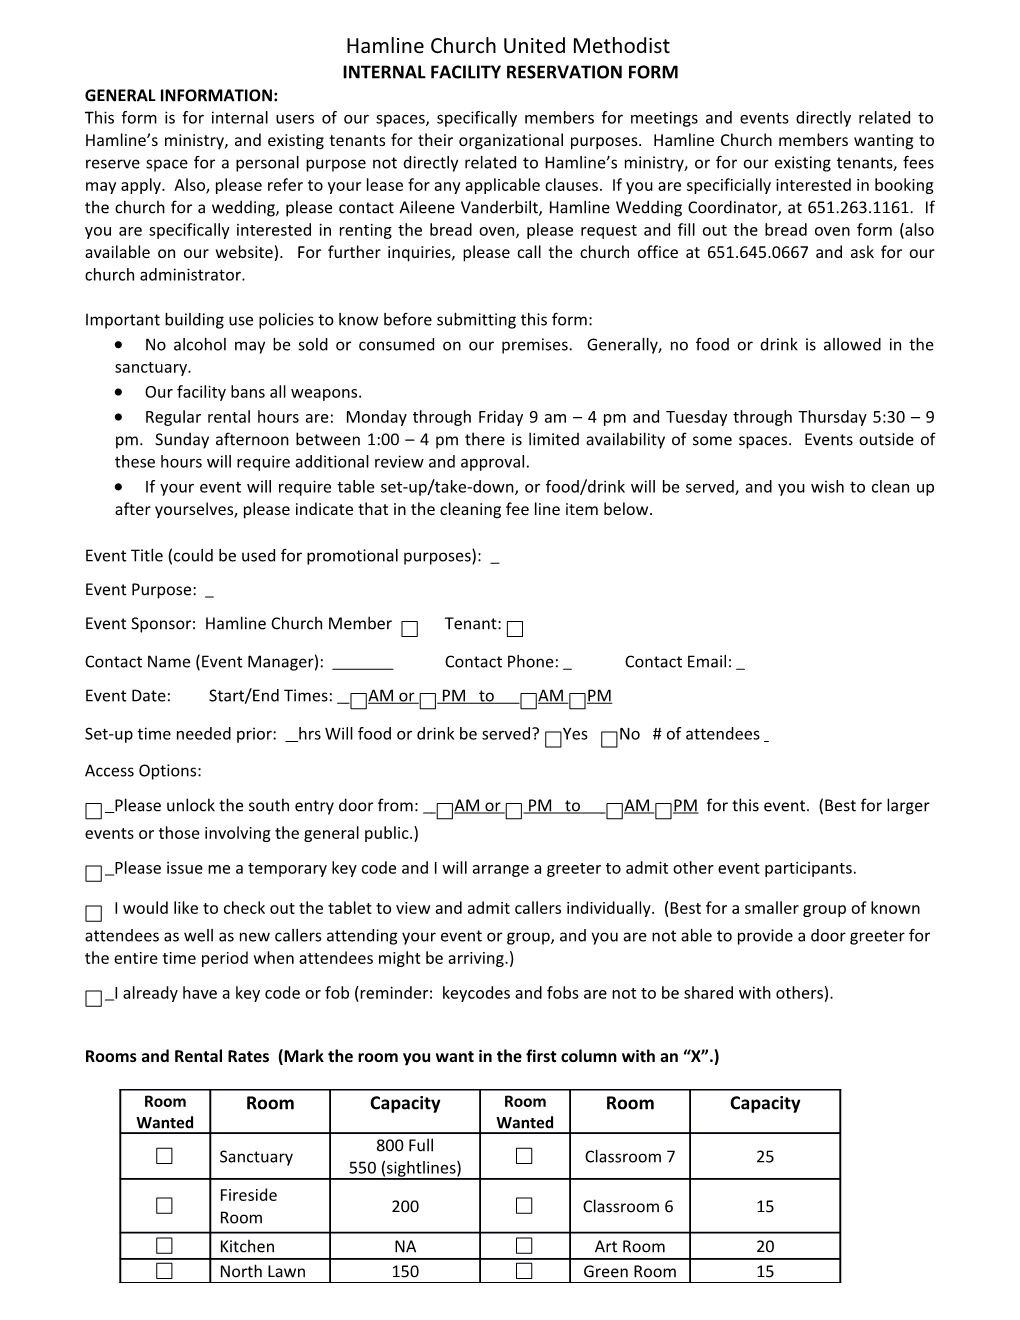 Internal Facility Reservation Form